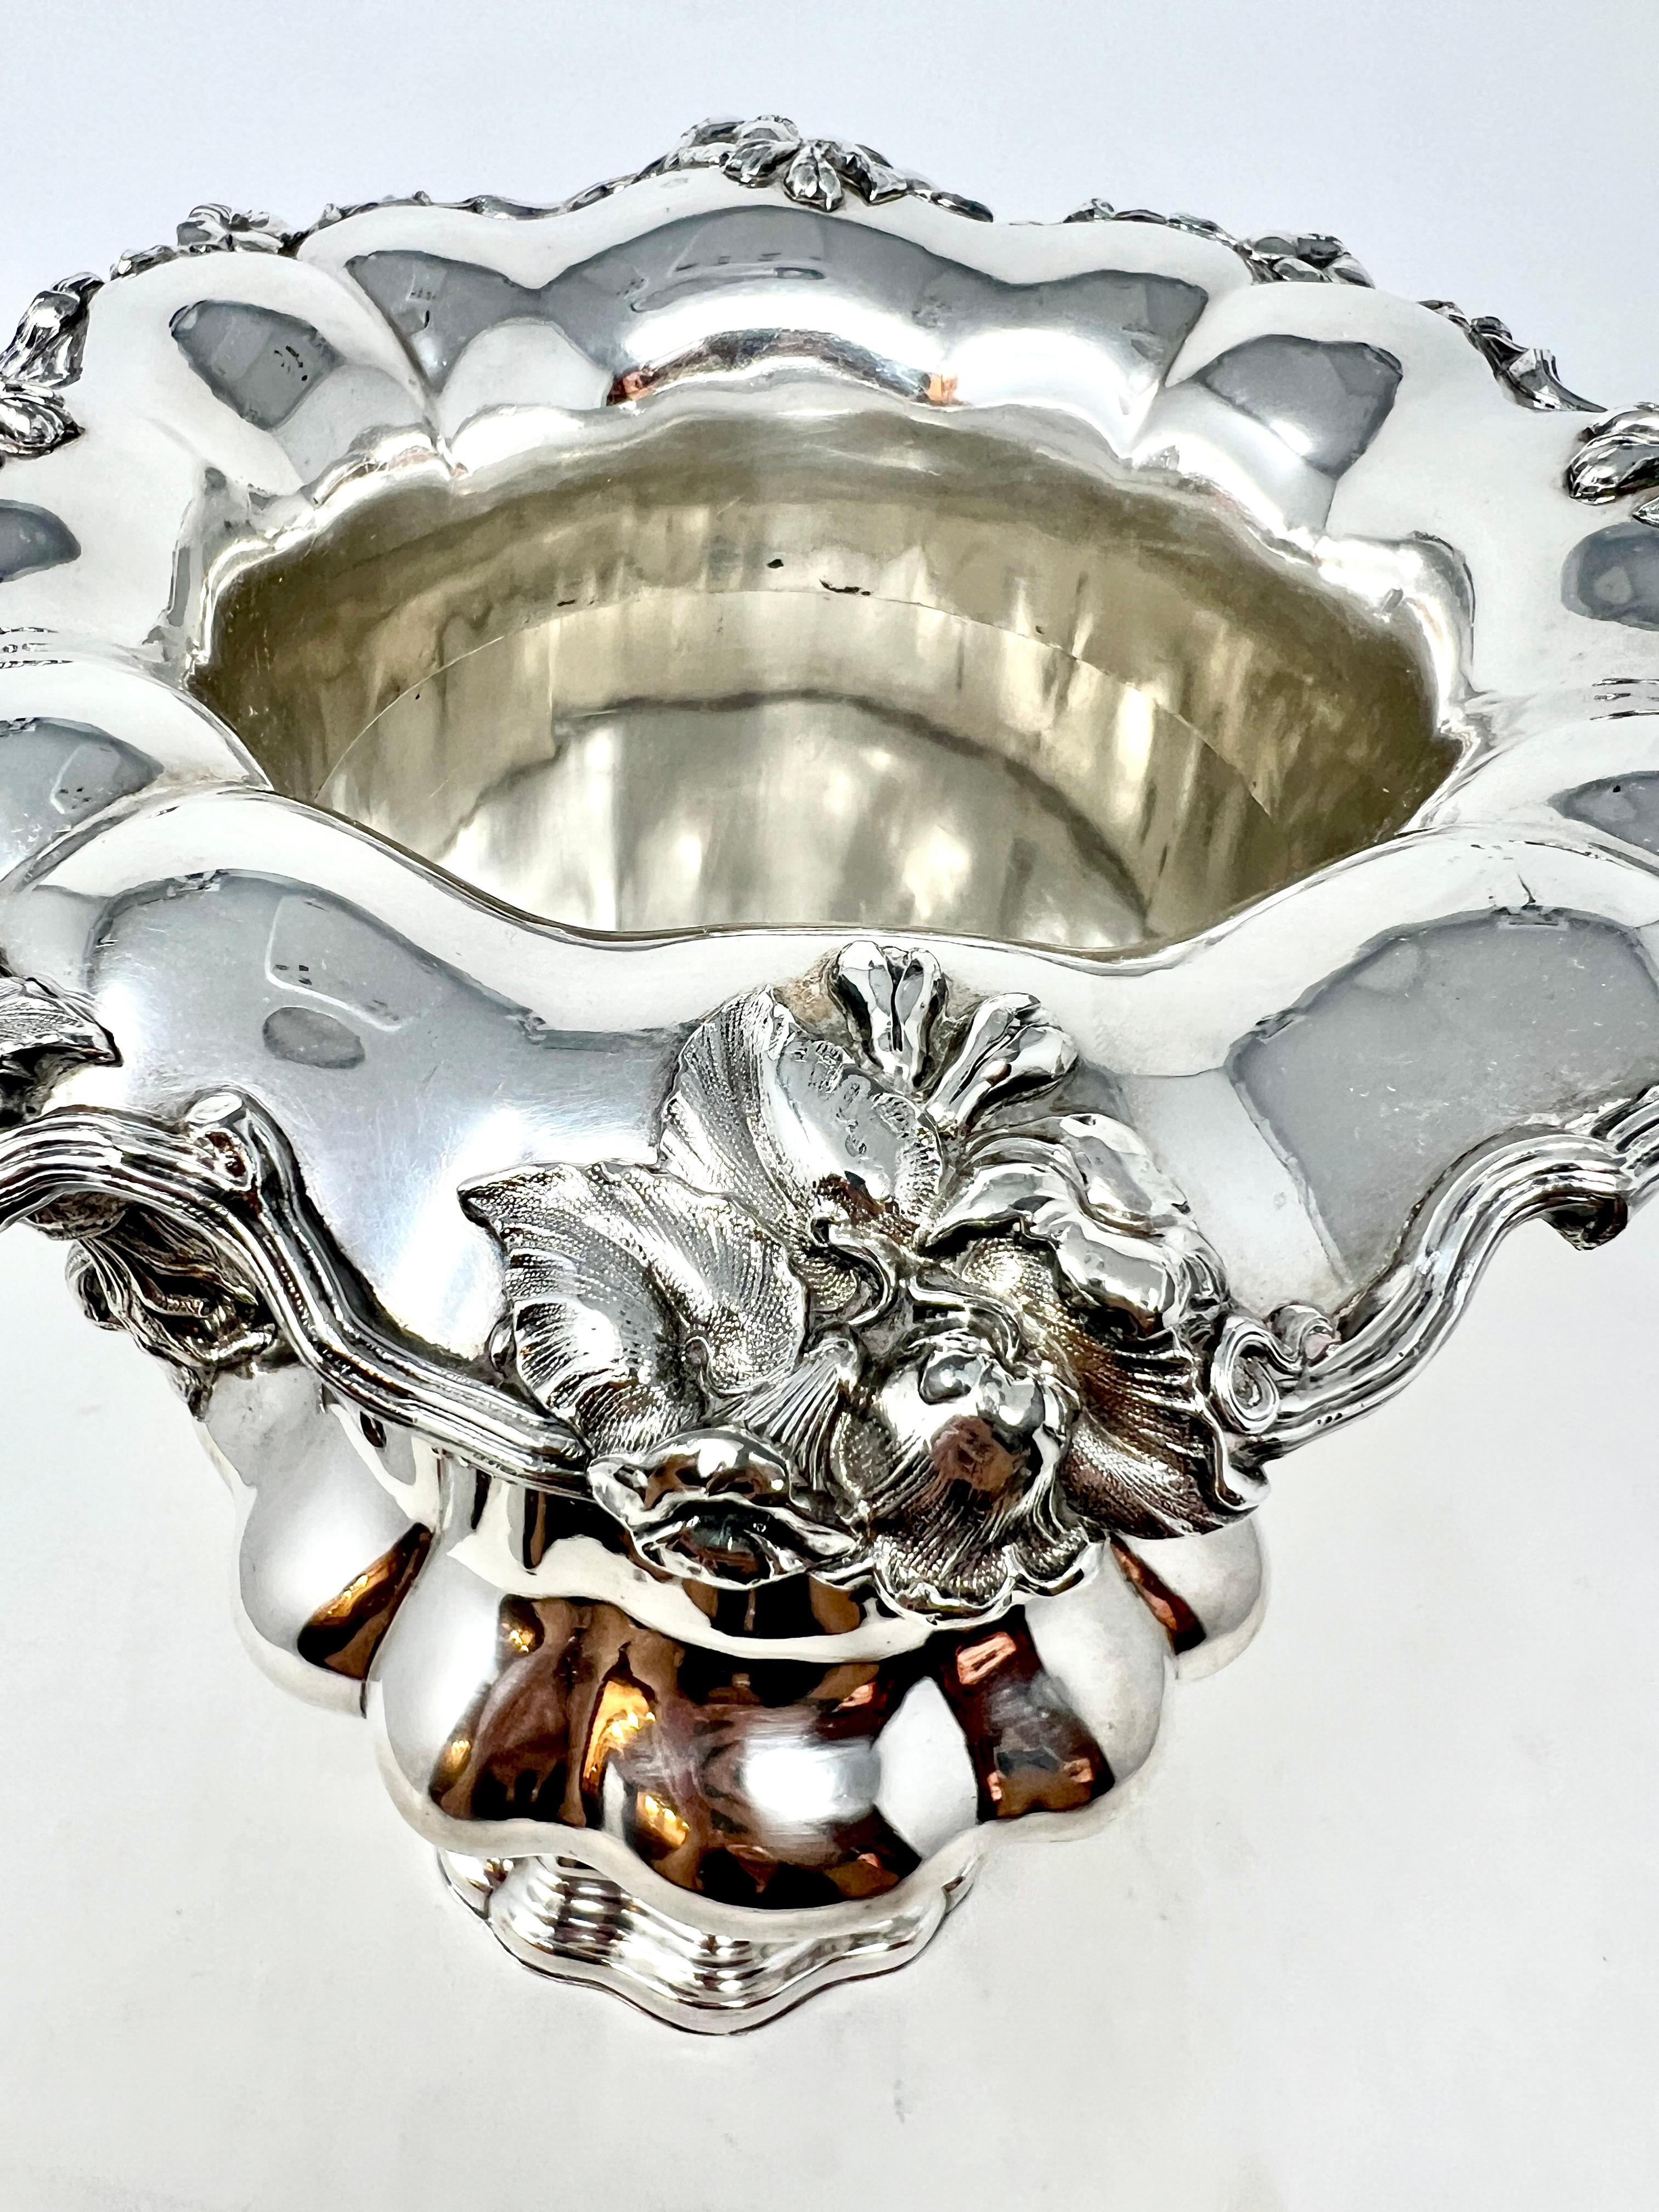 19th Century Antique English Silver Plated Champagne Bucket, Circa 1890-1900.